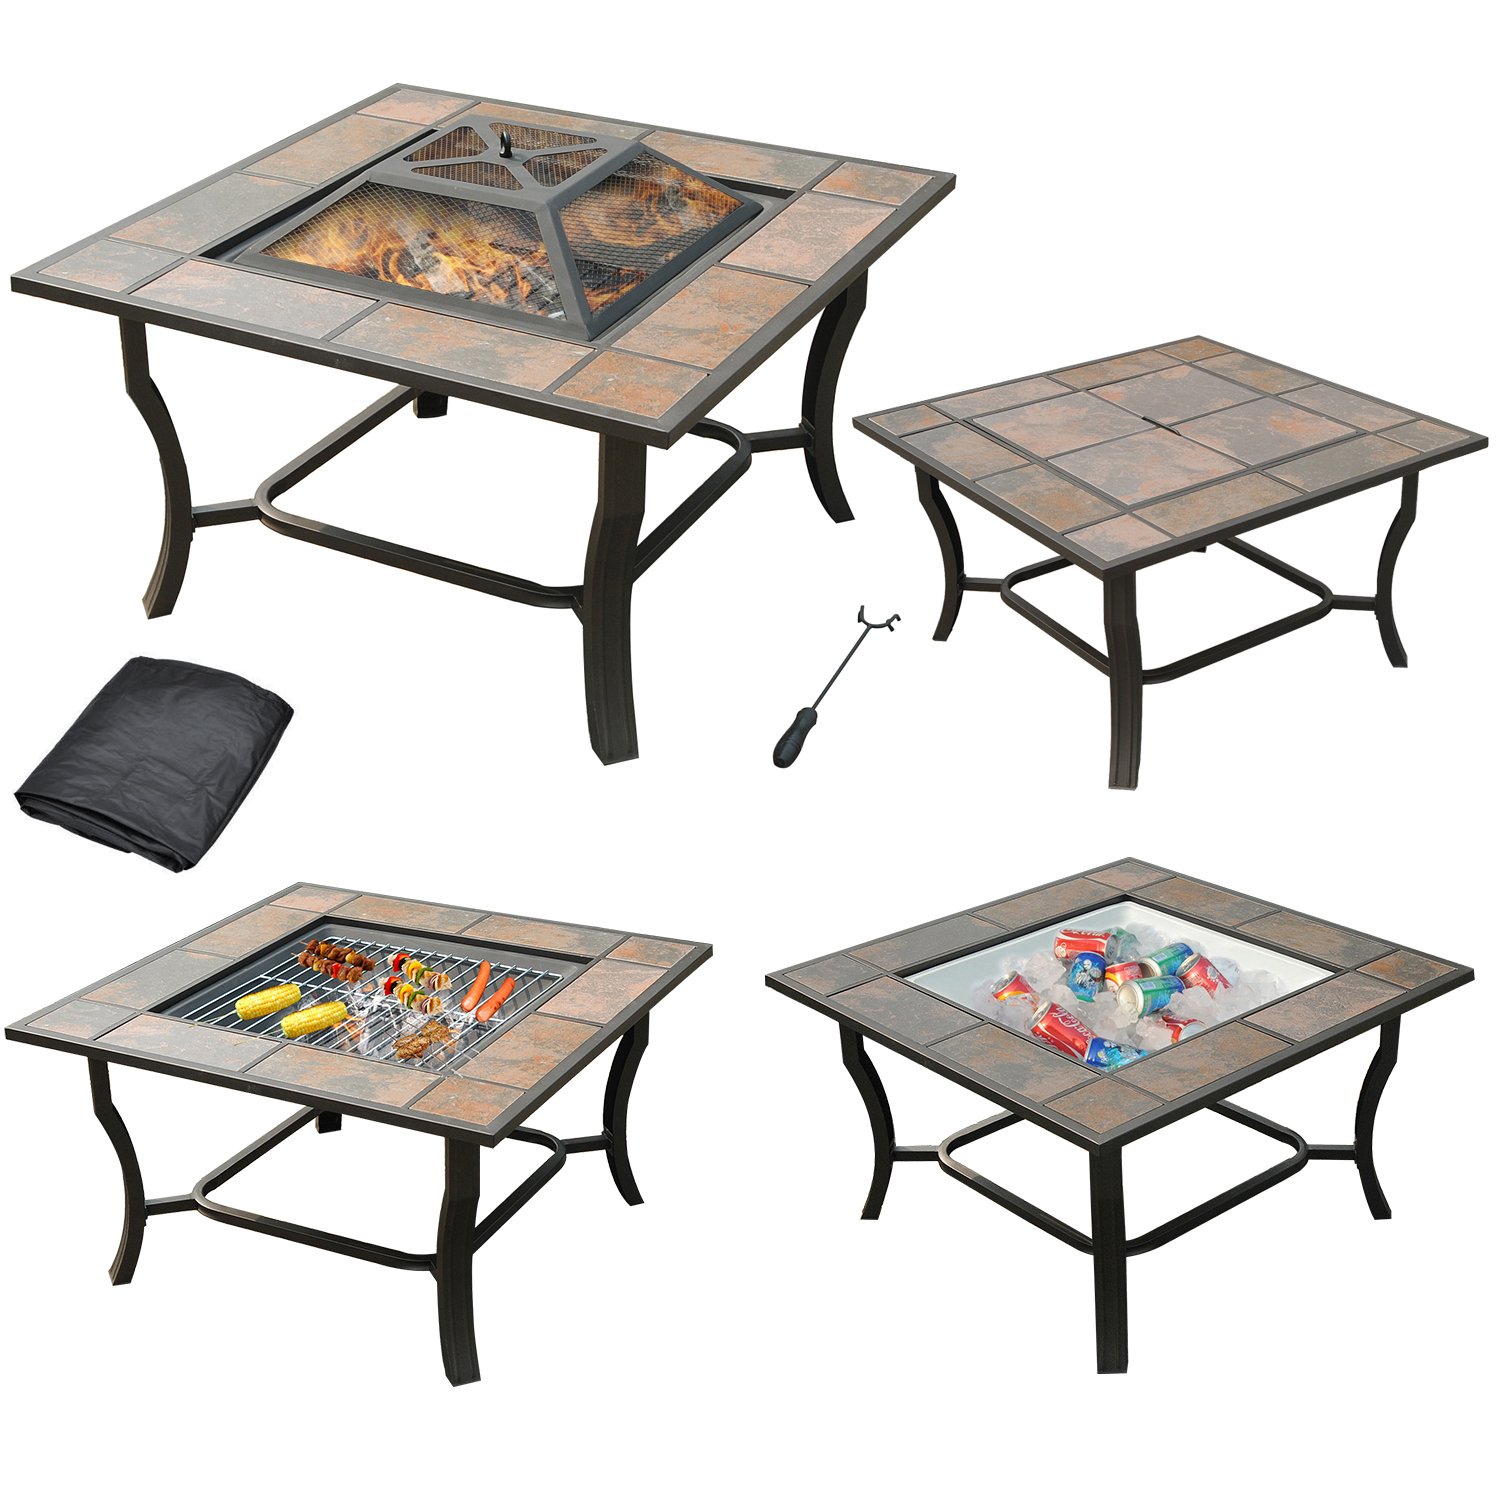 leisurelife square tile top fire pit grill side table outdoor cooler and coffee with cover garden runner for living room storage cabinets containers painted ideas multi drawer